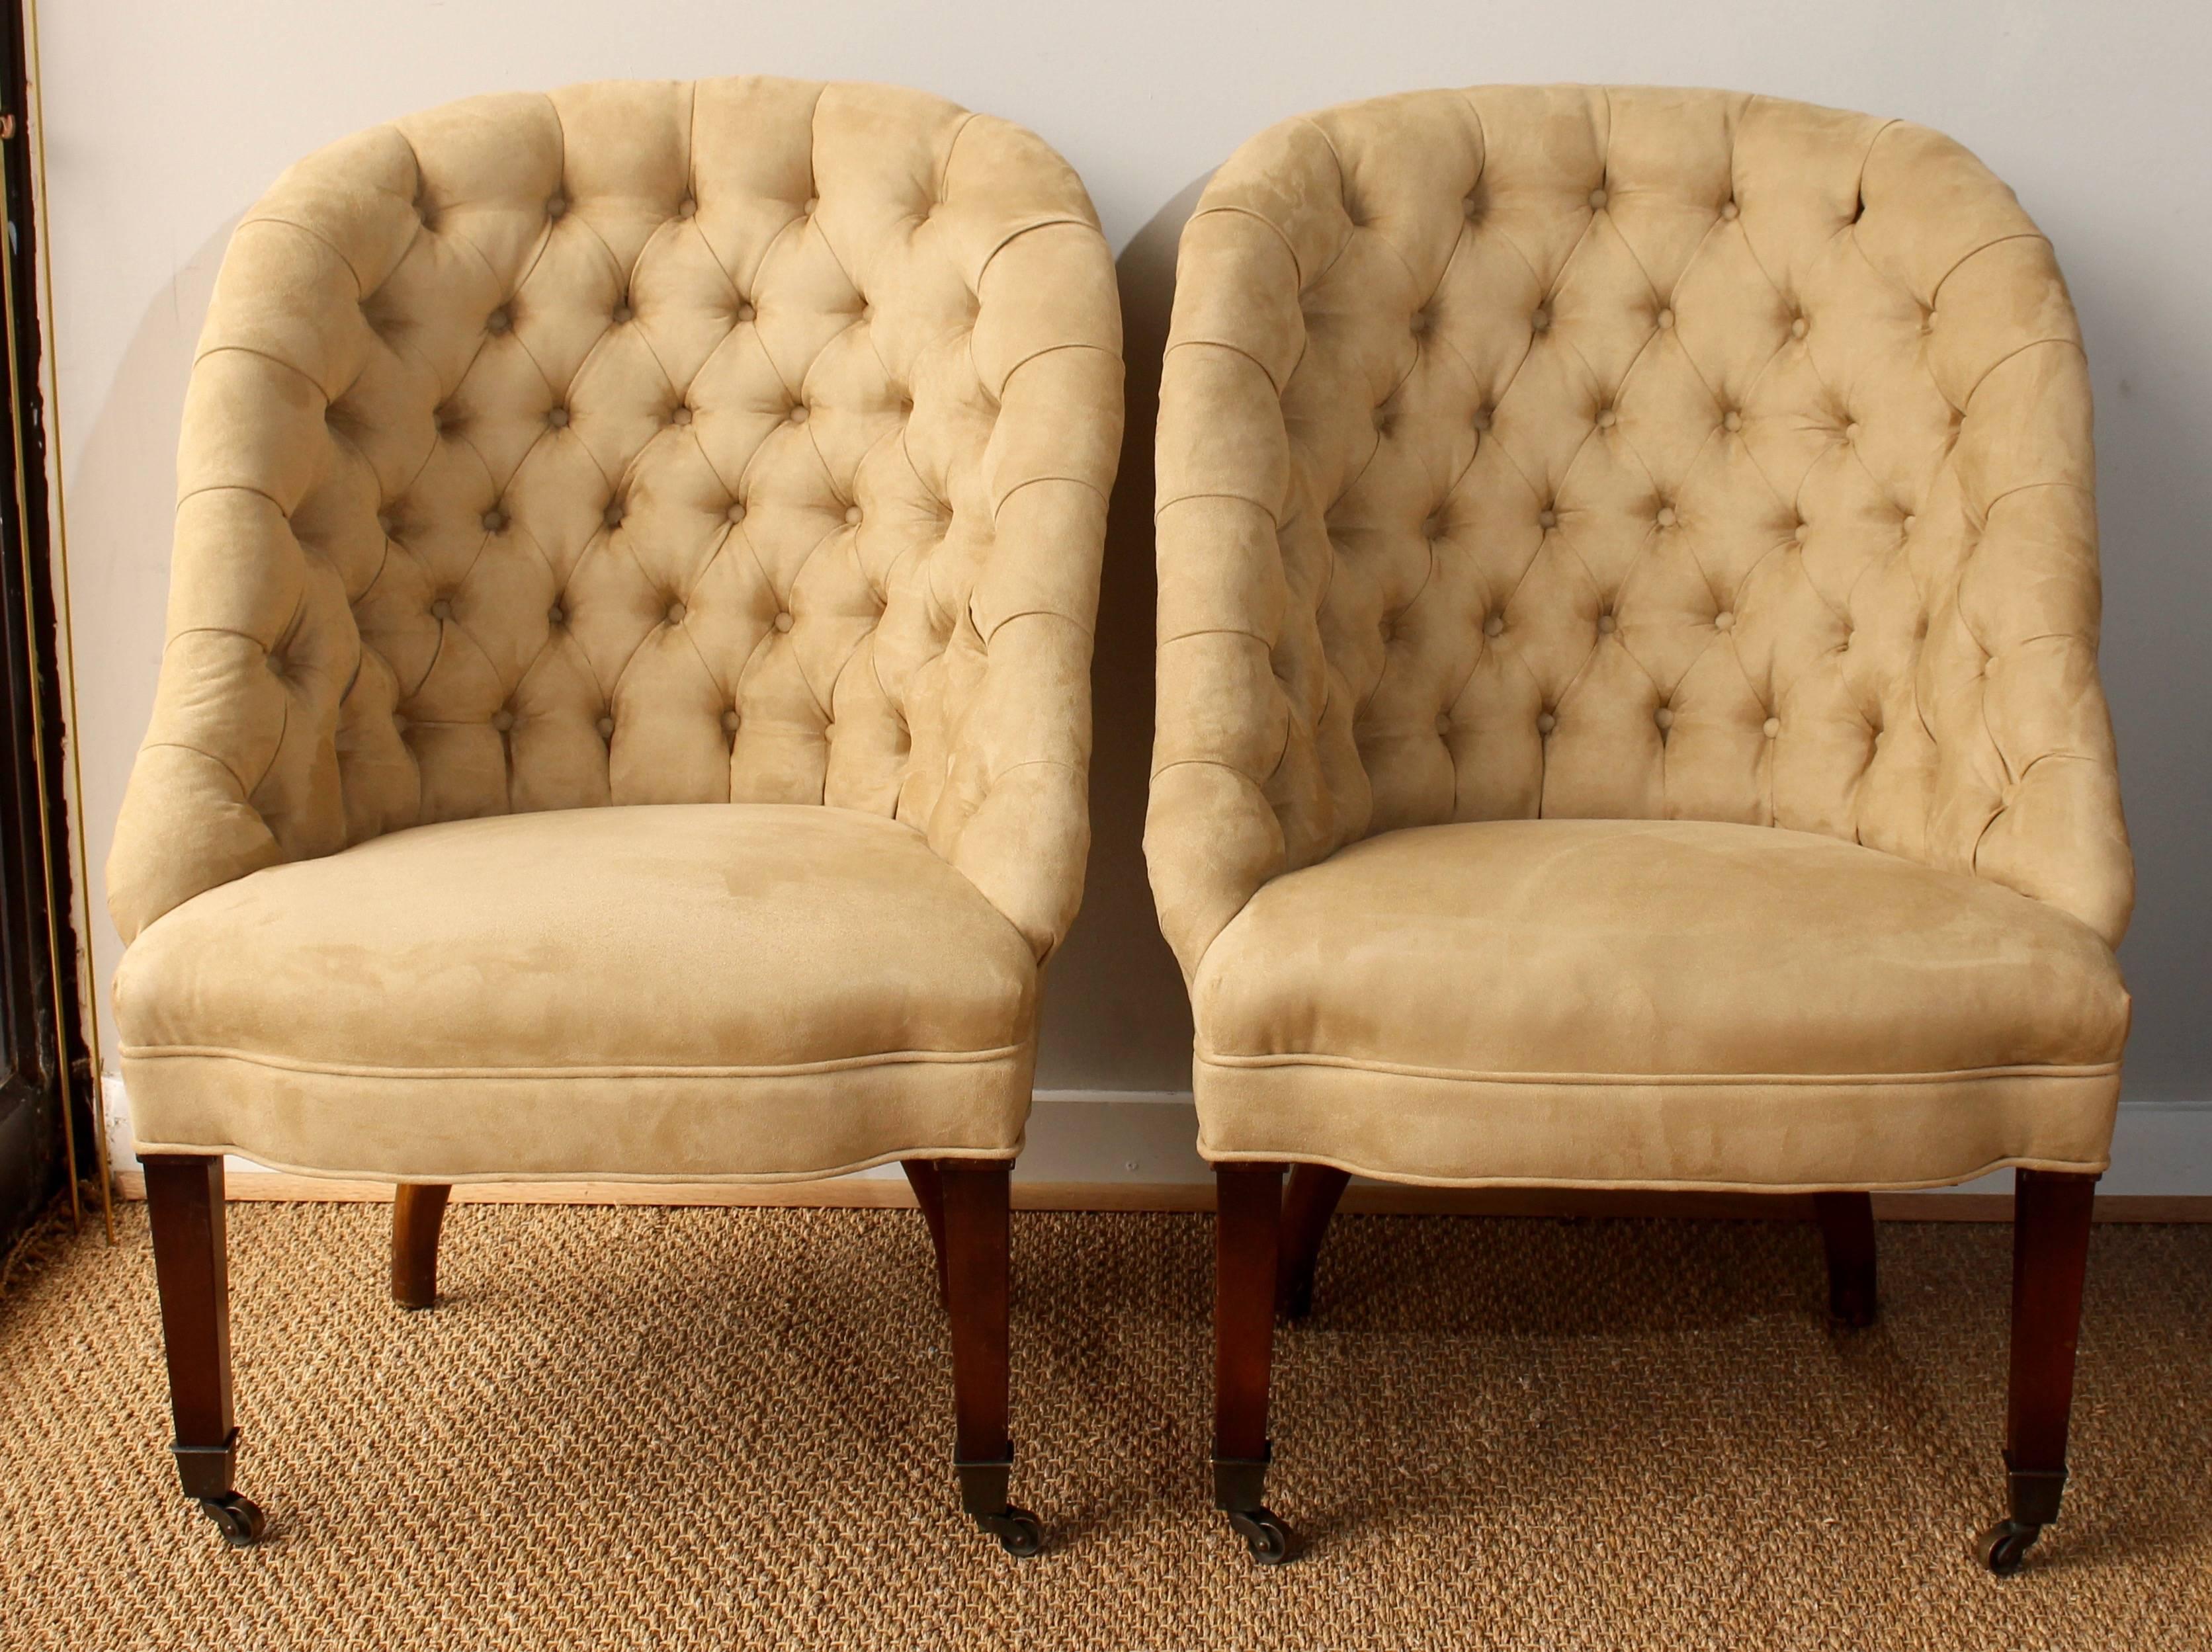 Regency Pair of Buttoned Back Slipper Chairs